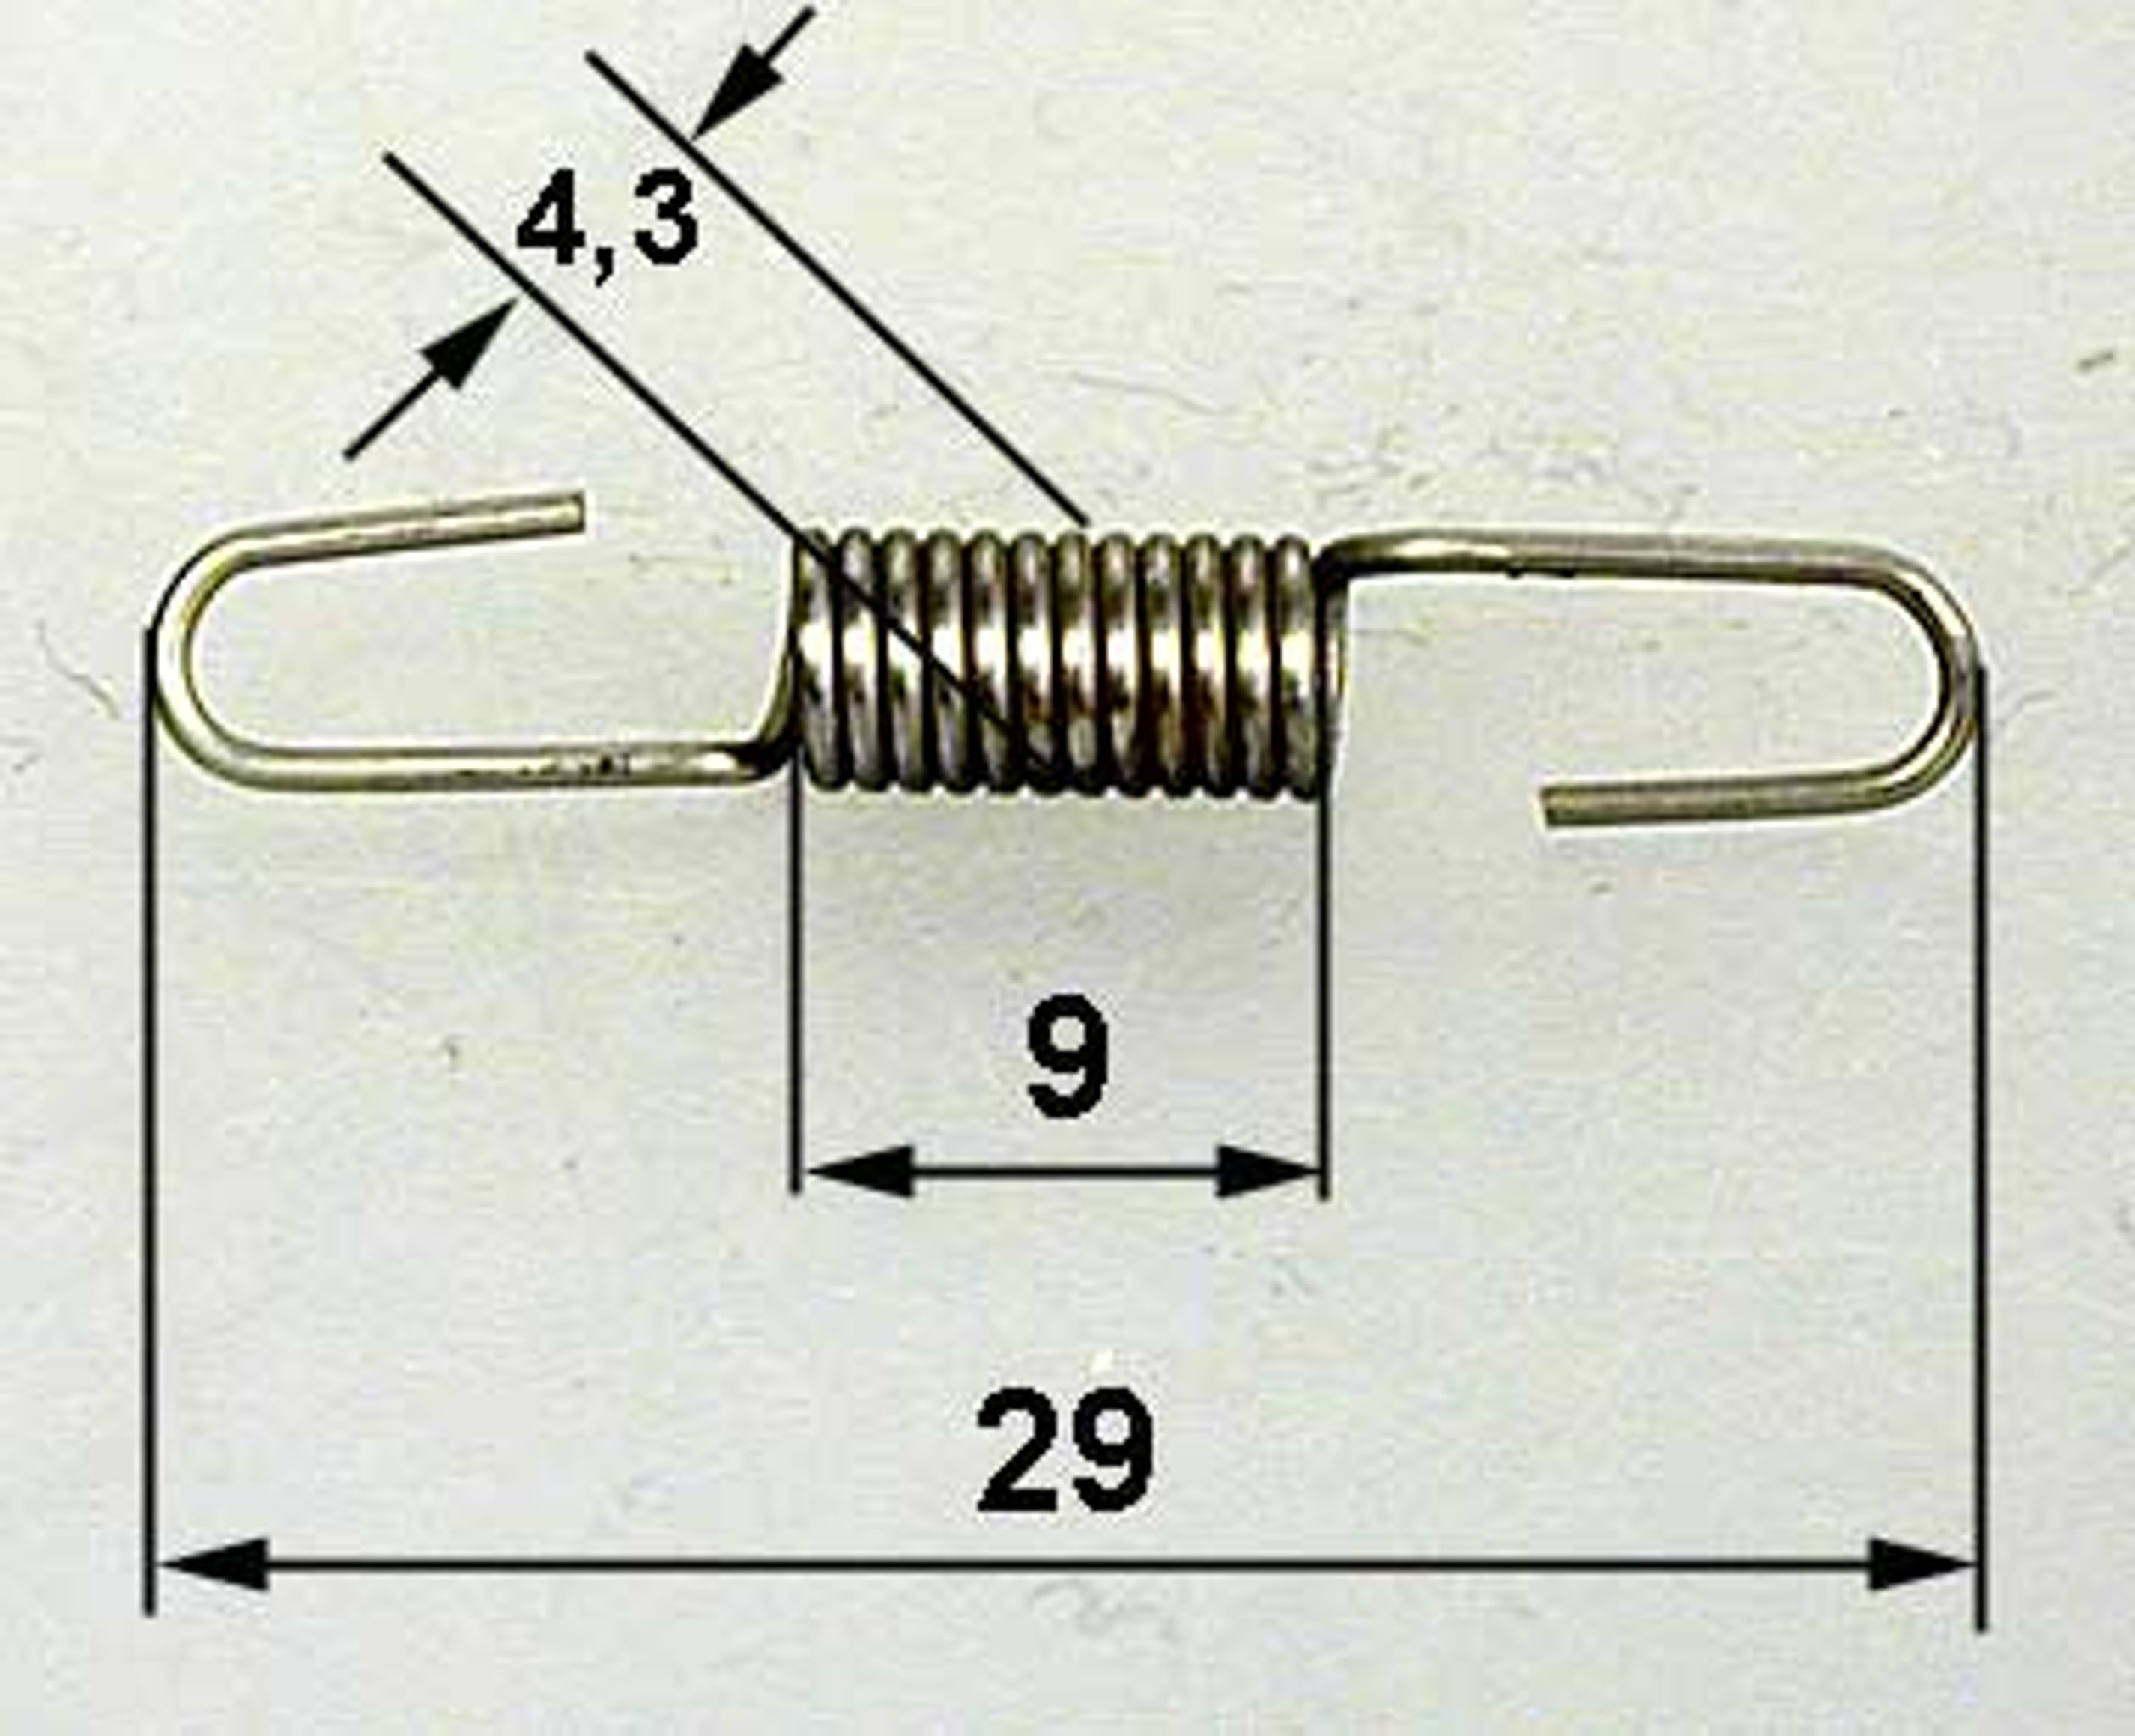 Masterfix replacement spring, y0166 - 2pcs.